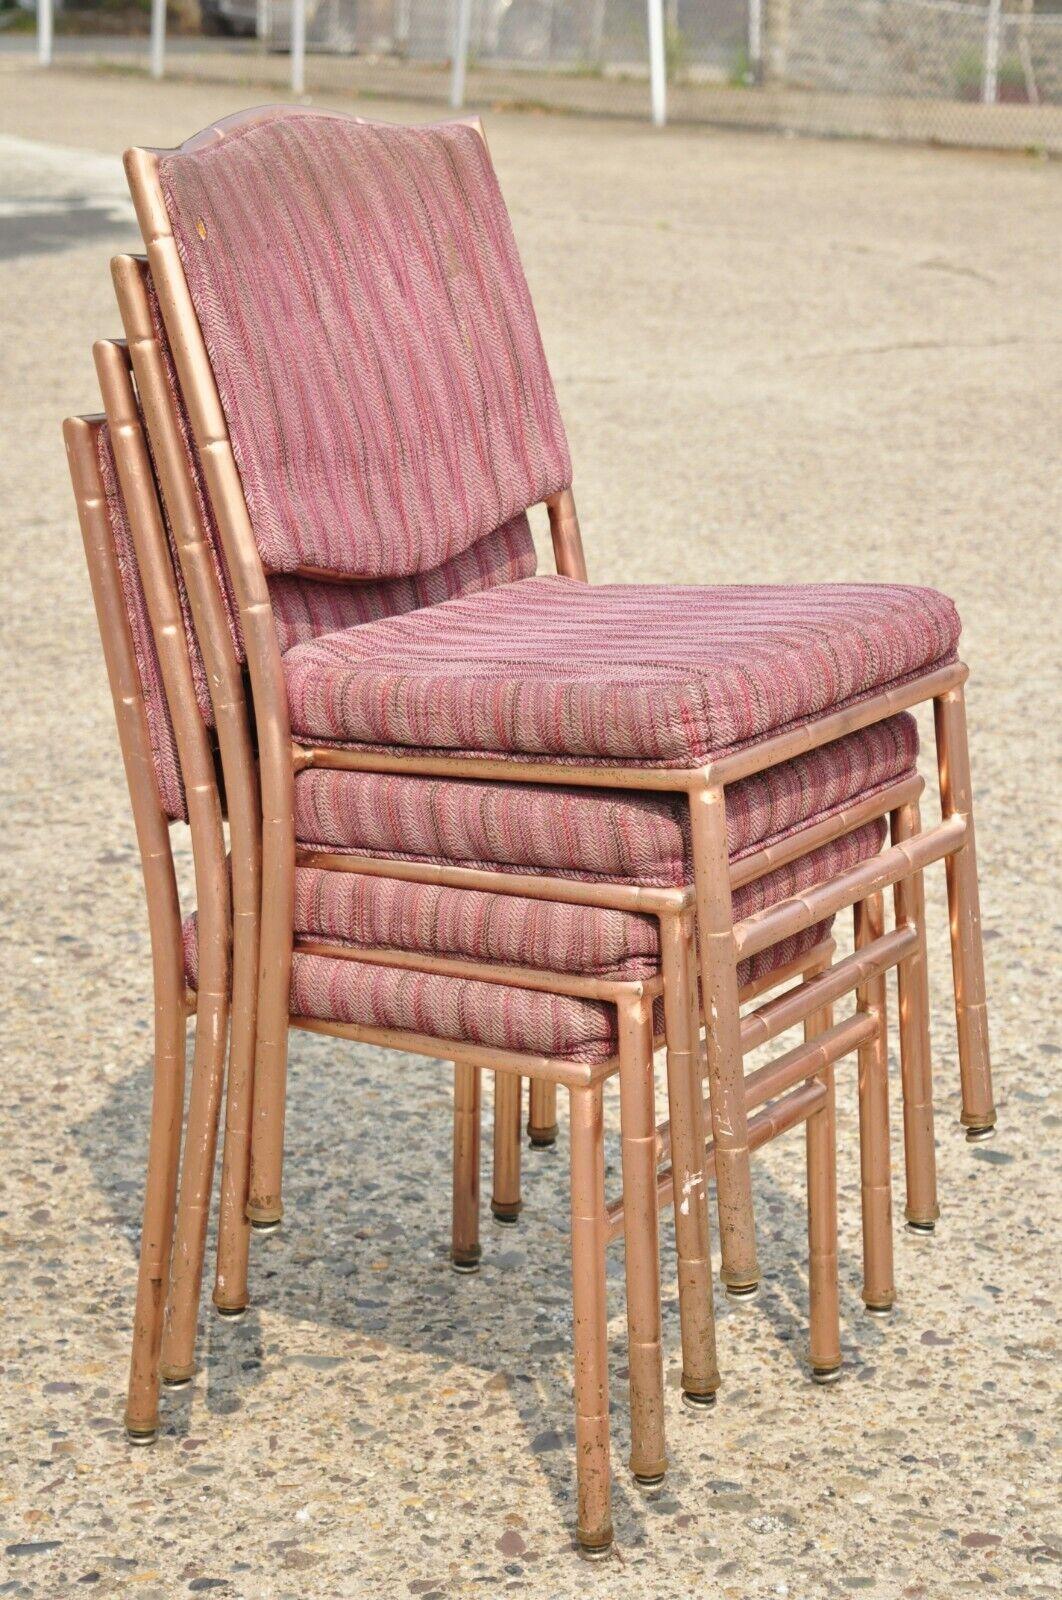 Vintage Shelby Williams faux bamboo stacking pink / rose gold banquet dining chairs with removable upholstered backs. 
***Approximately 58 chairs available***
Item features a steel metal frame, faux bamboo design, removable upholstered backrest,